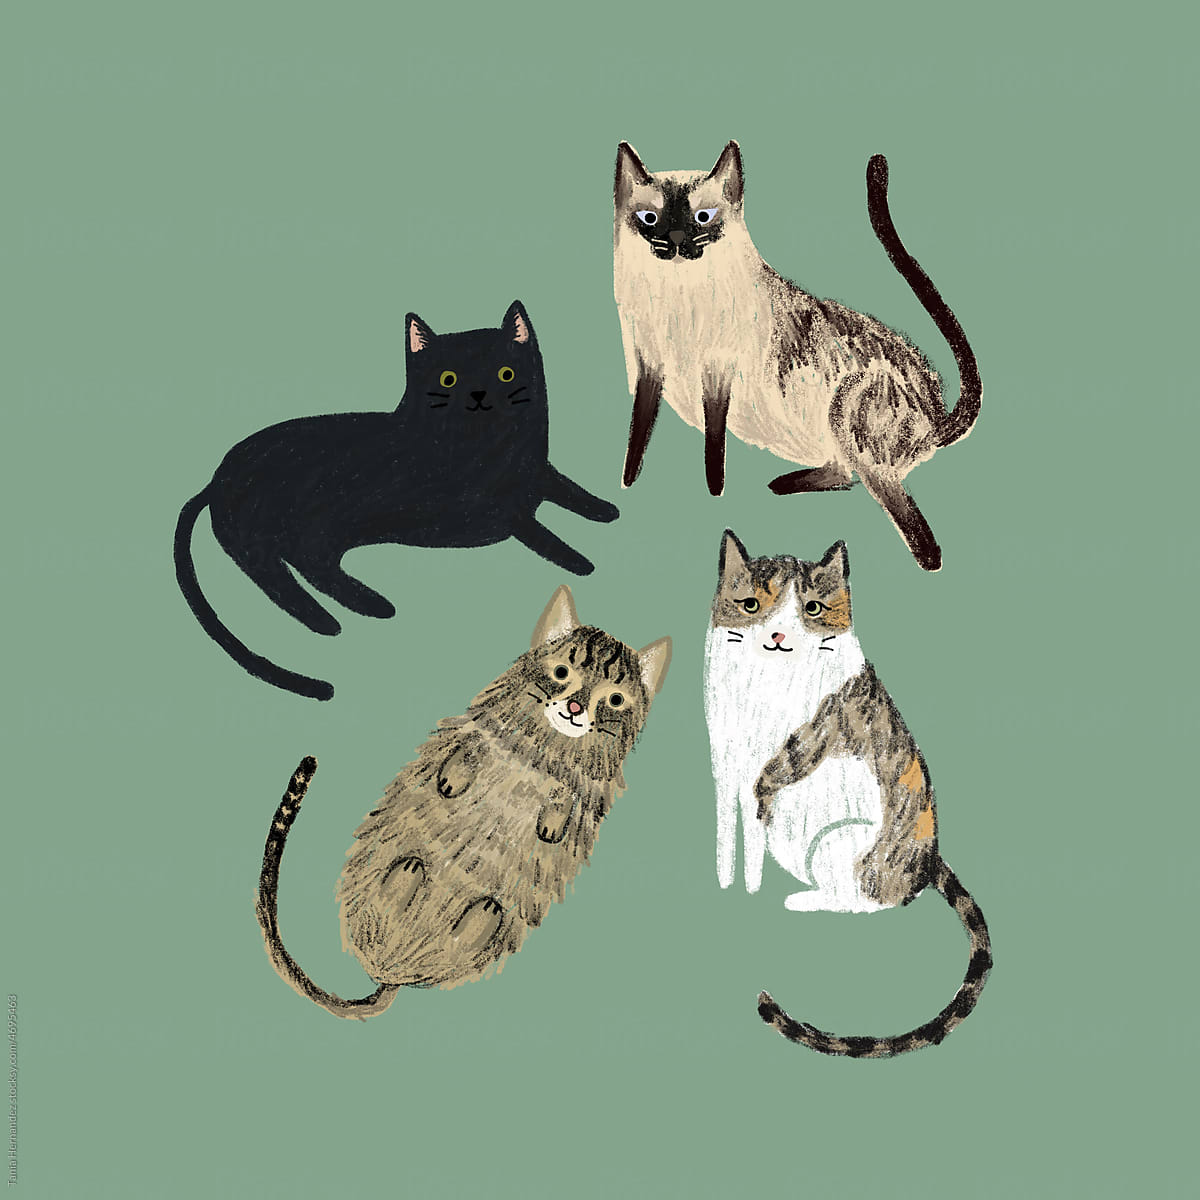 4 CATS IN GREEN